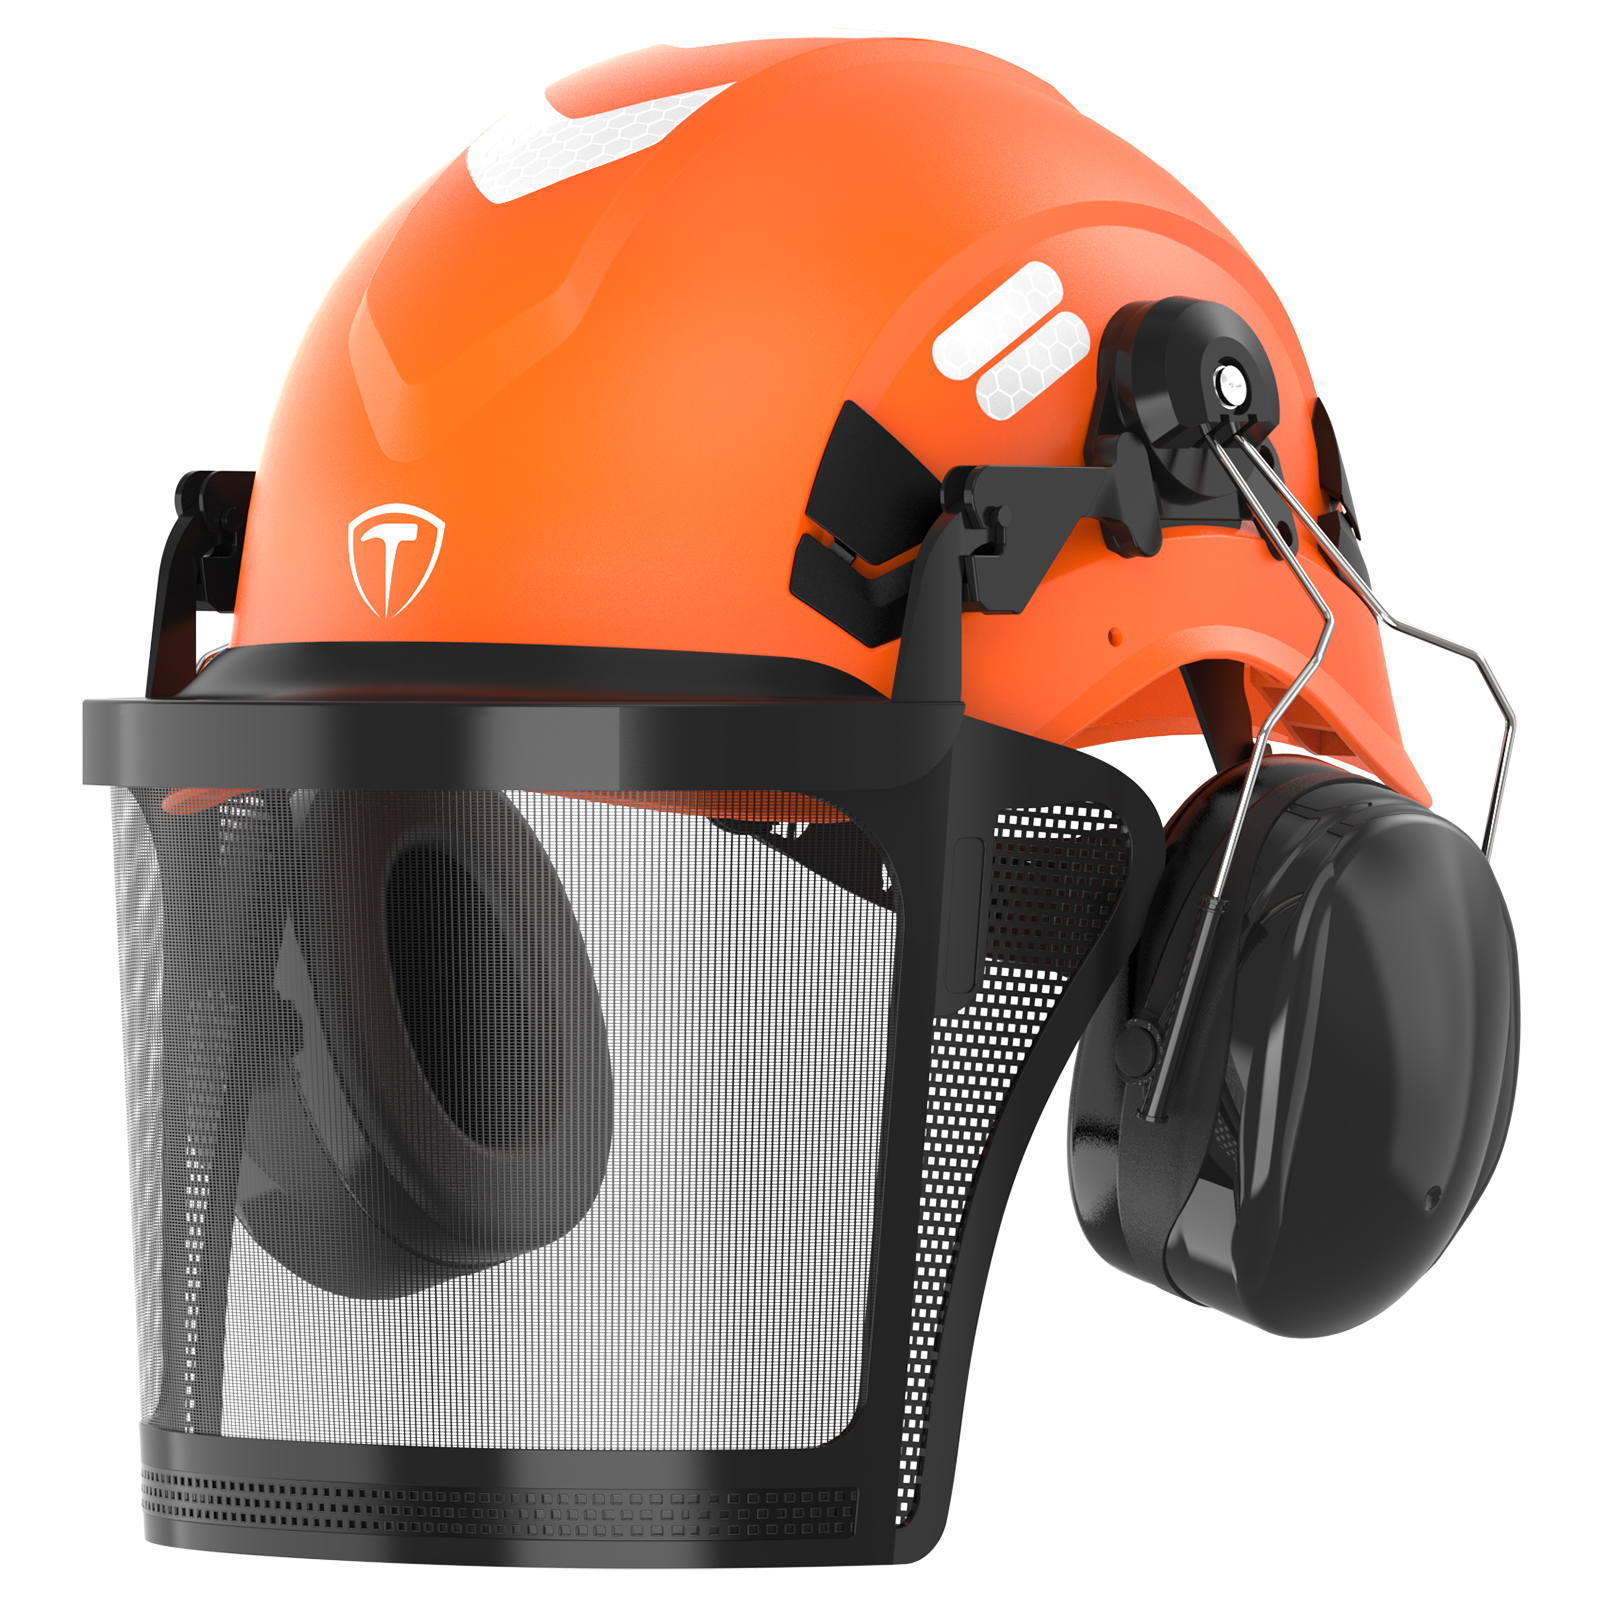 Forestry Safety Helmet with Ear Muffs  Face Shield Visor Chainsaw Safety  Helmet ANSI Approved Arborist Helmet with Anti-Fog Goggles